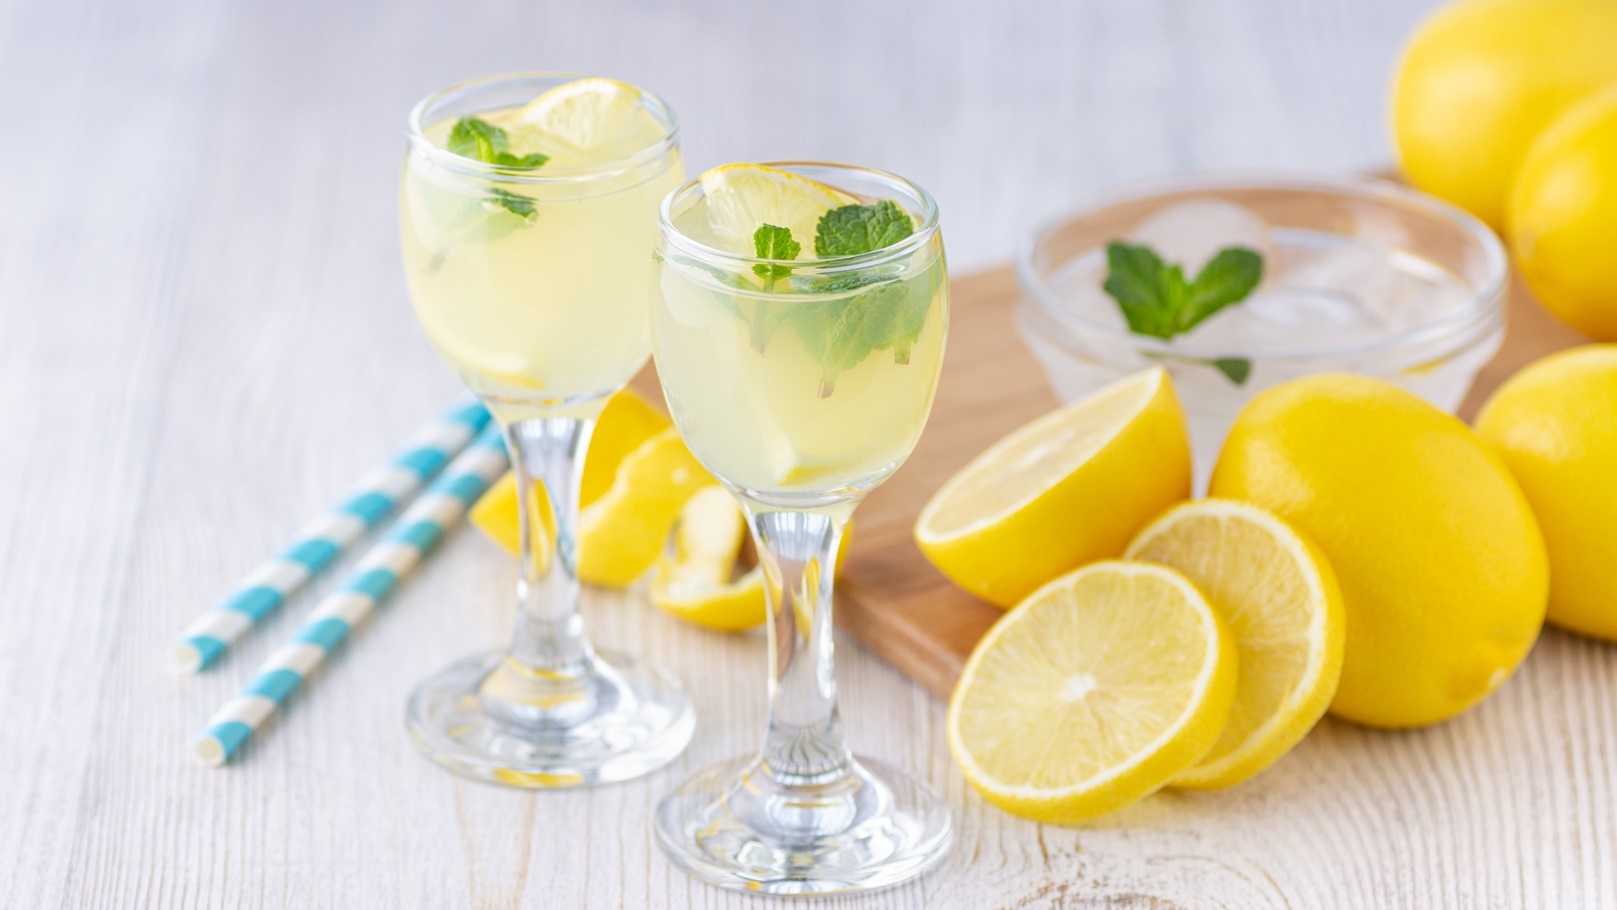 alcohol-cocktail-drink-with-lemon-mint-and-ice-2022-03-11-16-30-09-utc